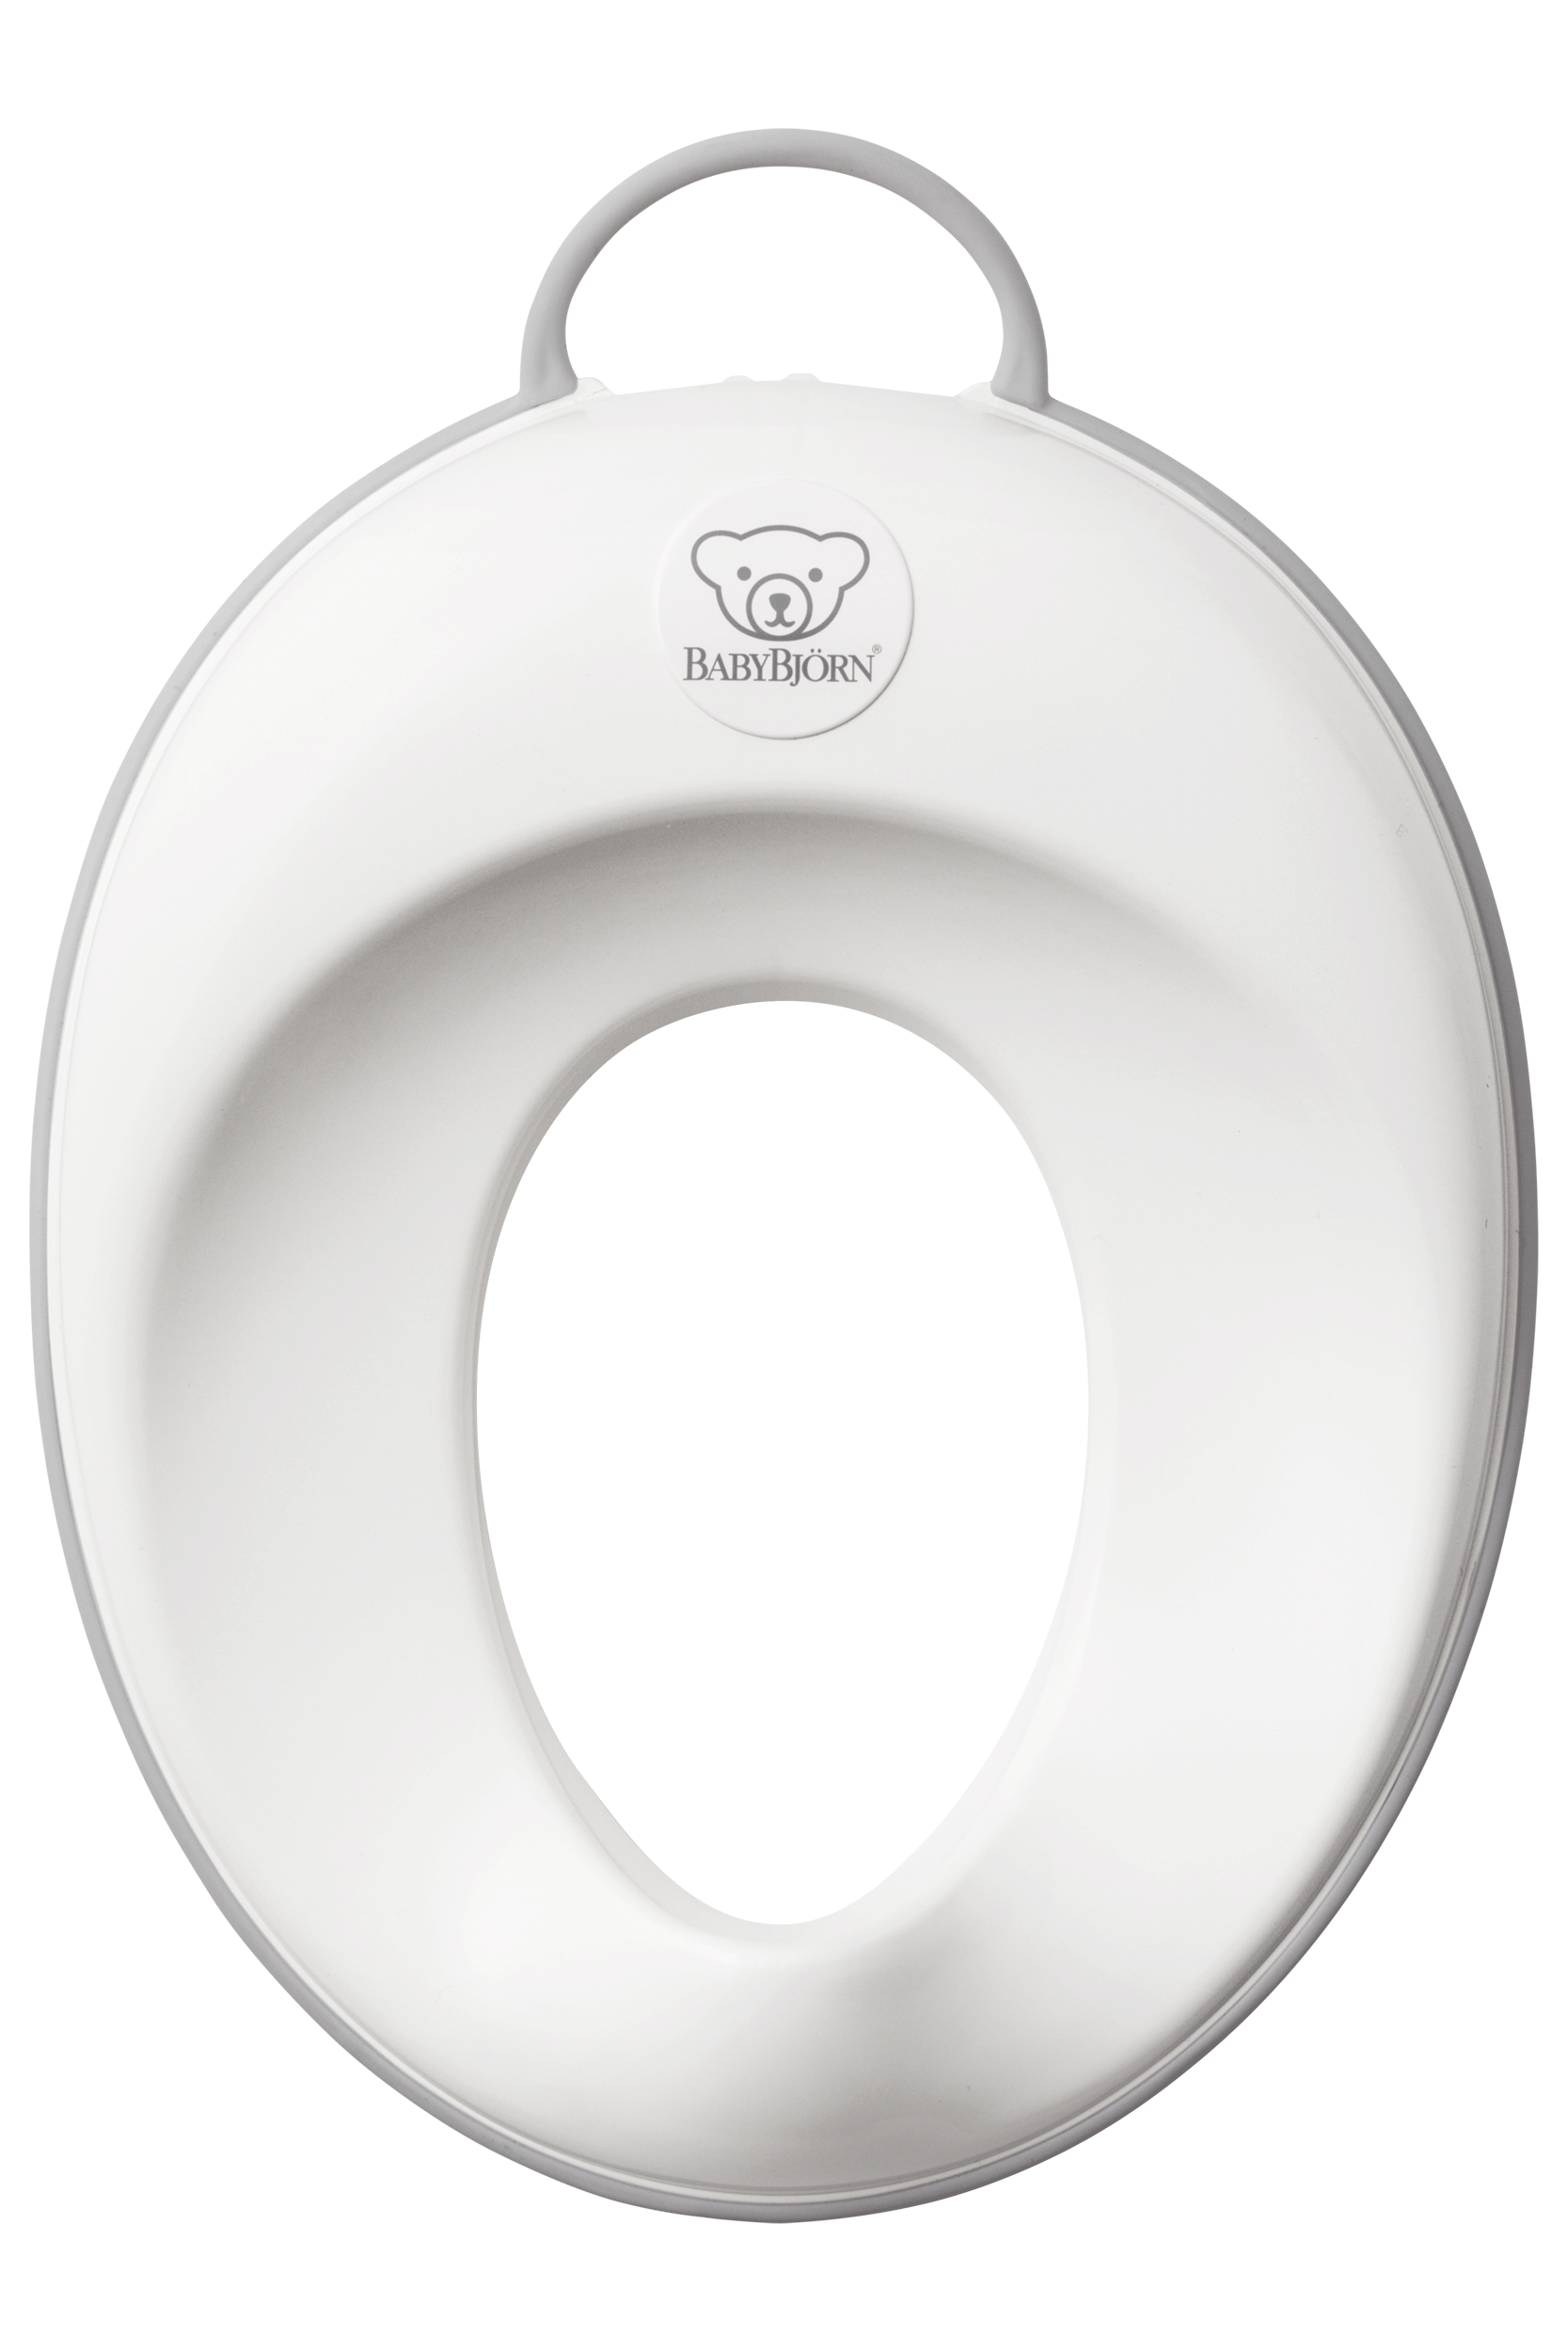 toilet training seat baby bjorn Toilet training seat – comfy & easy to use